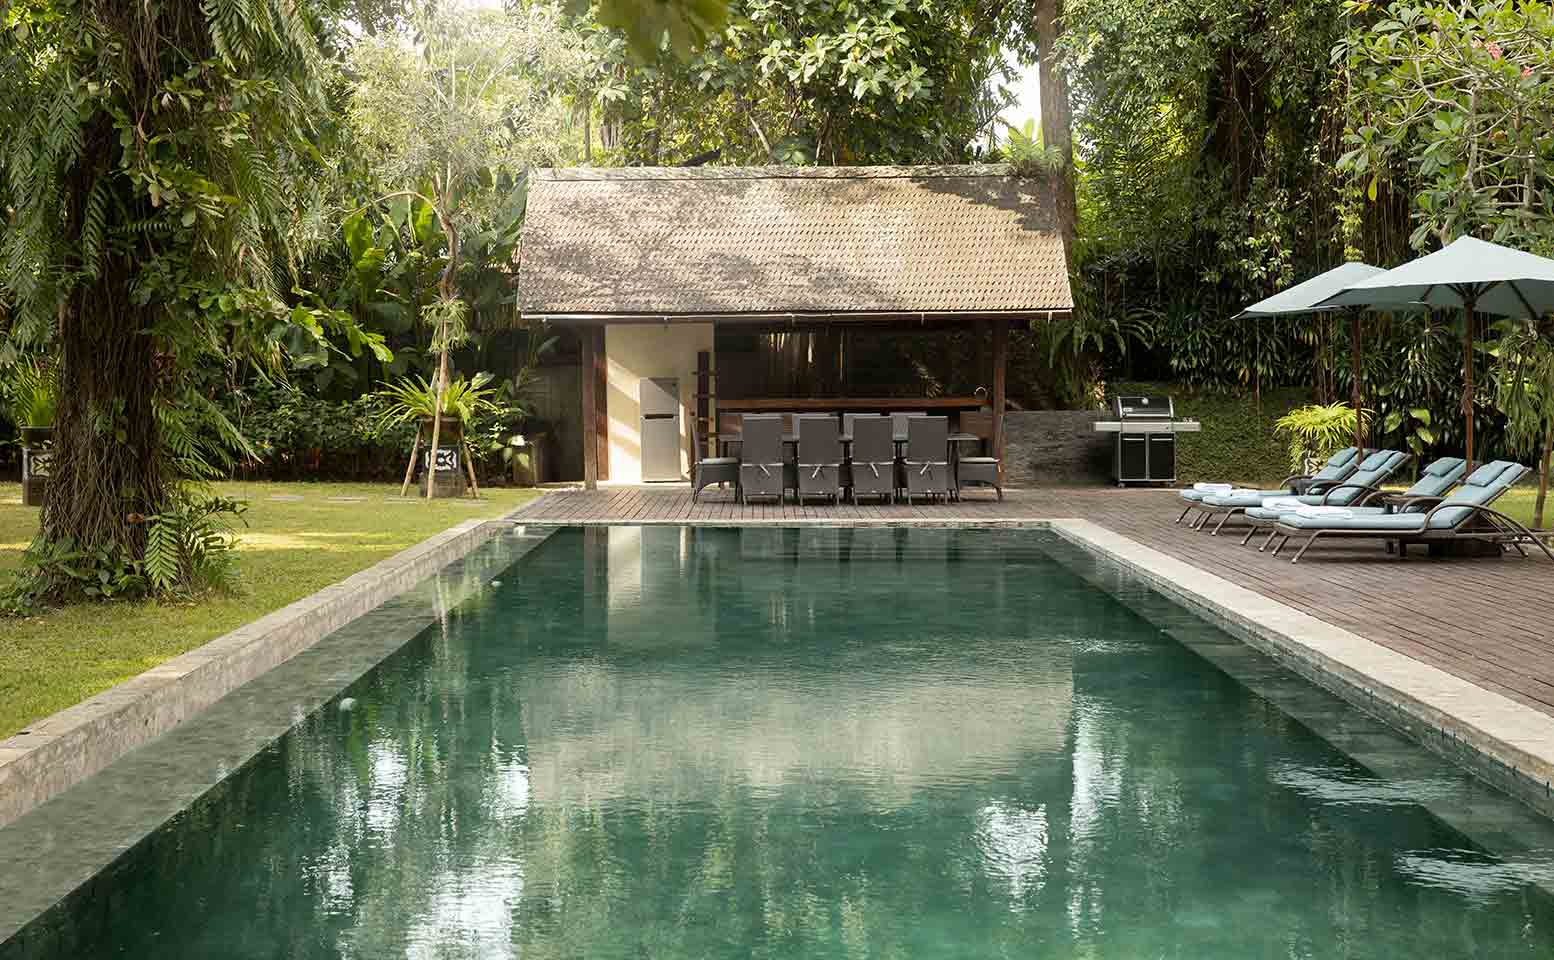 Villa Tirtadari - pool with lounge chairs and umbrellas in the middle of a lush tropical garden.